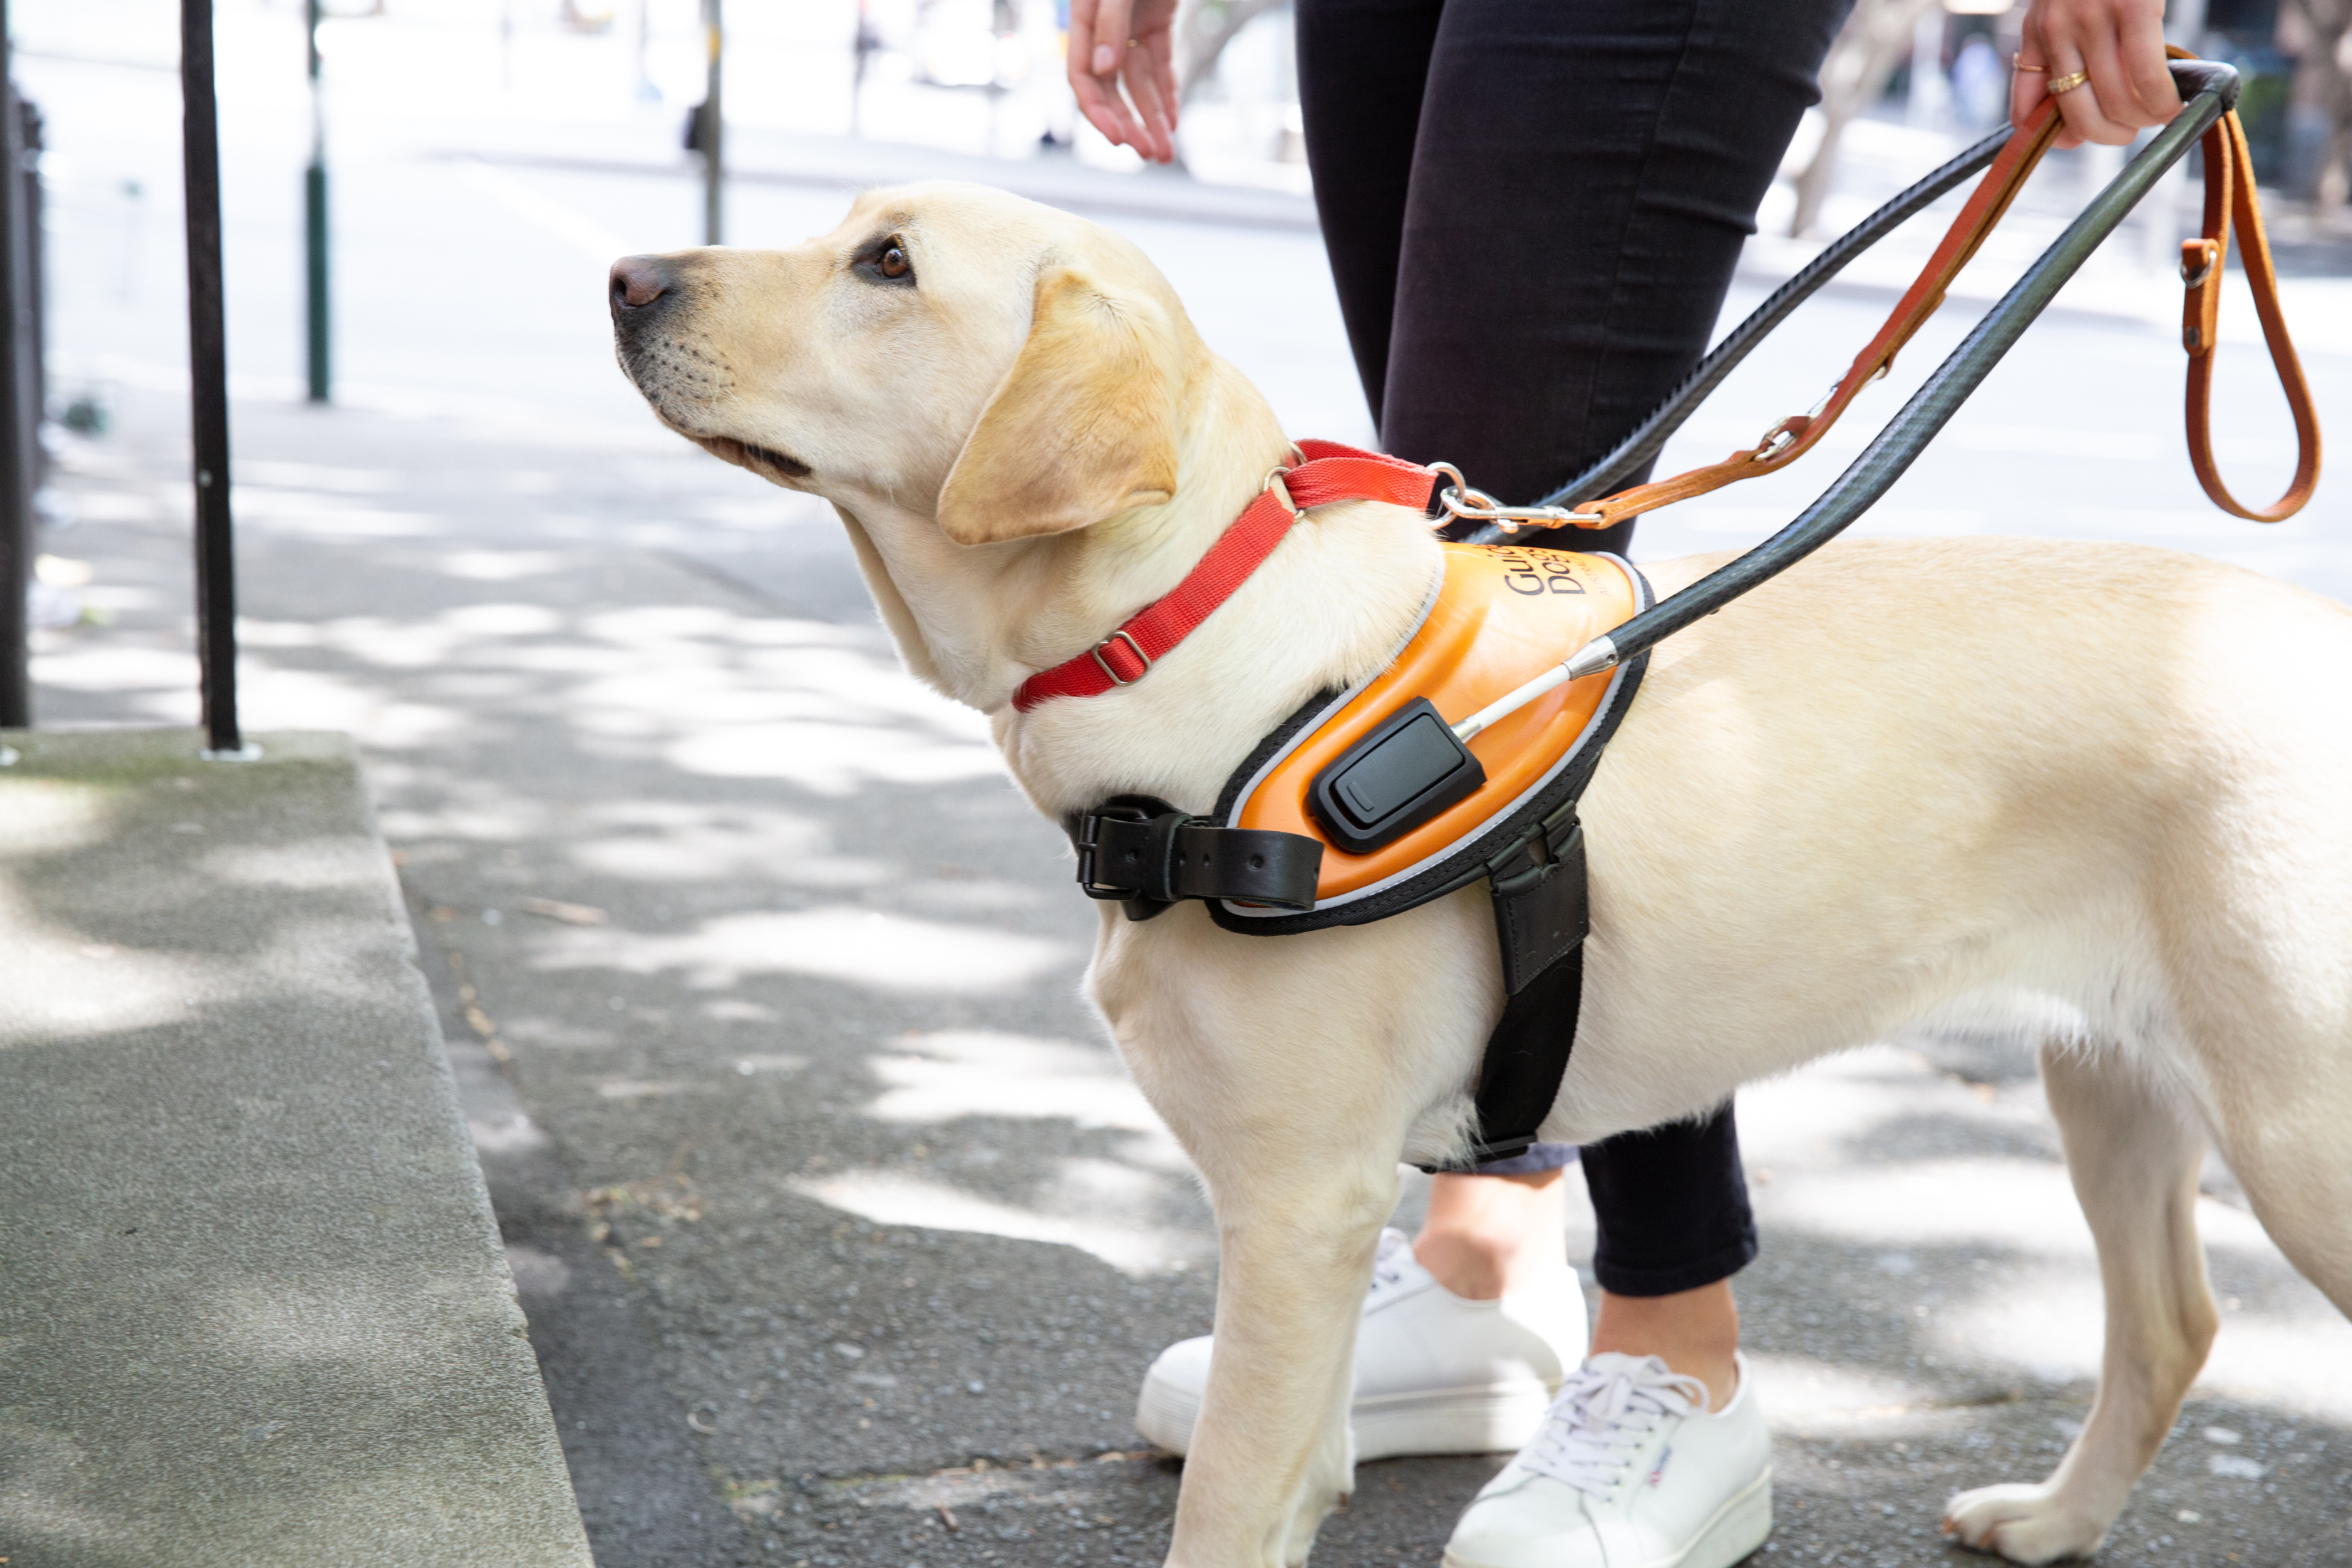 A Guide Dog wearing a harness